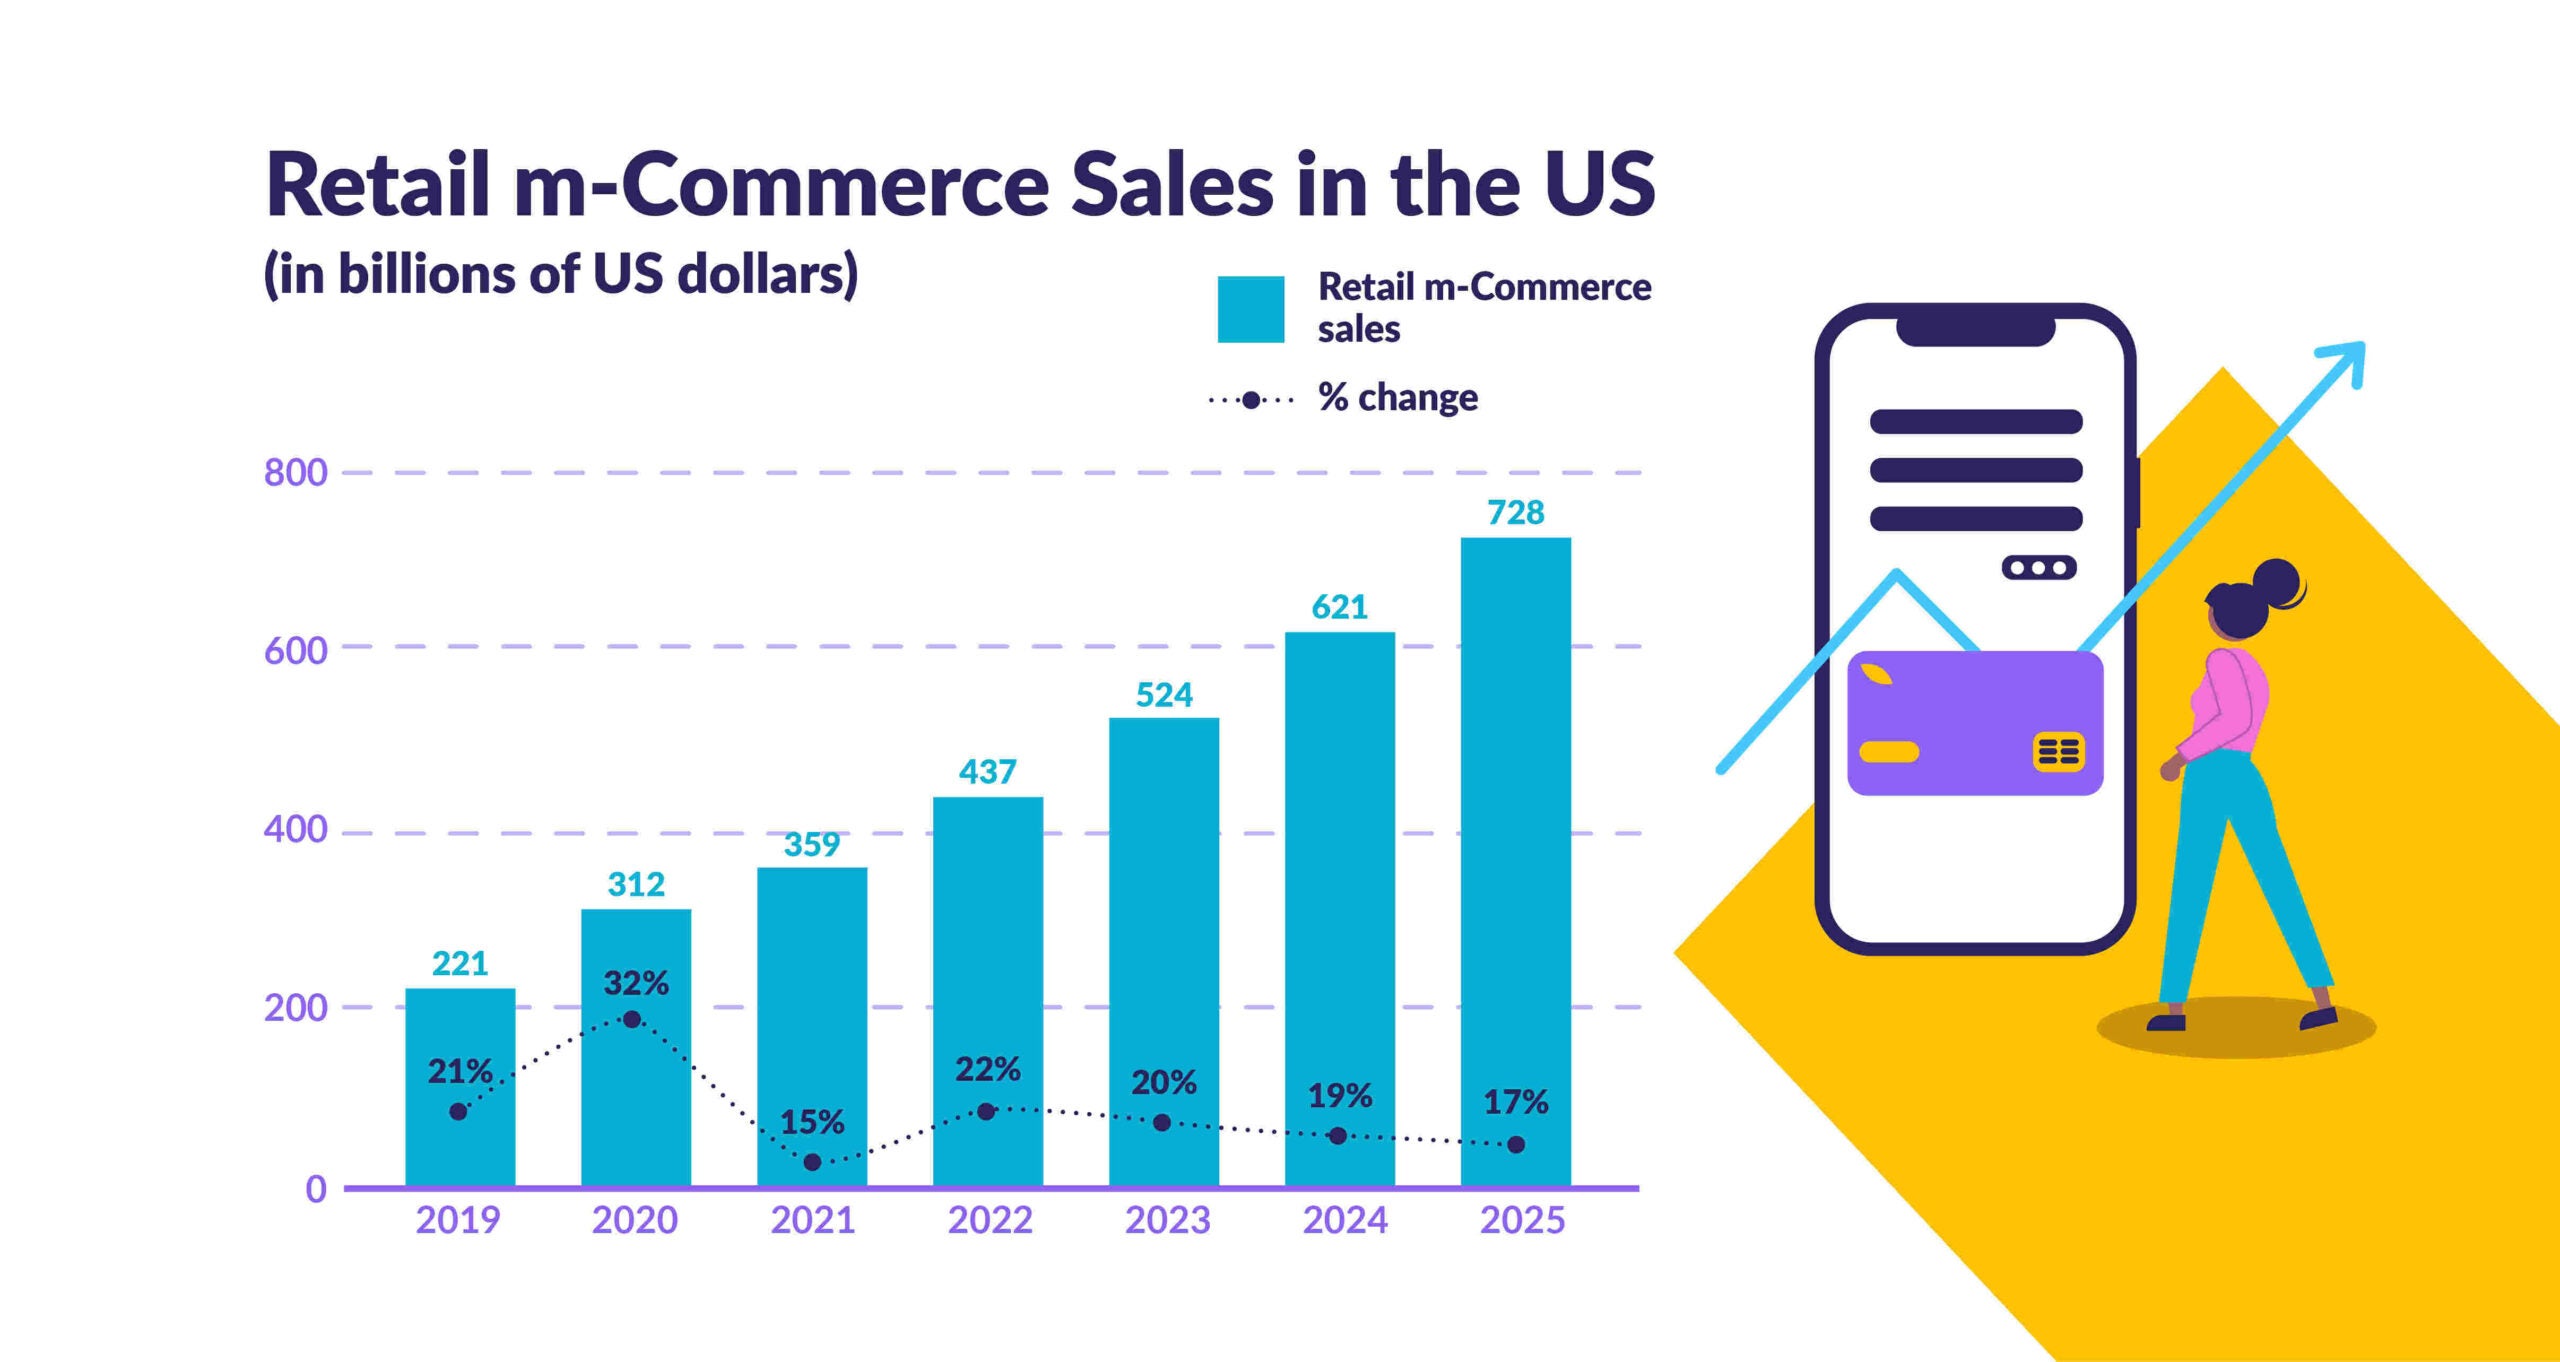 bar chart tracking the retail m-commerce sales in the US, from 2019 - 2025